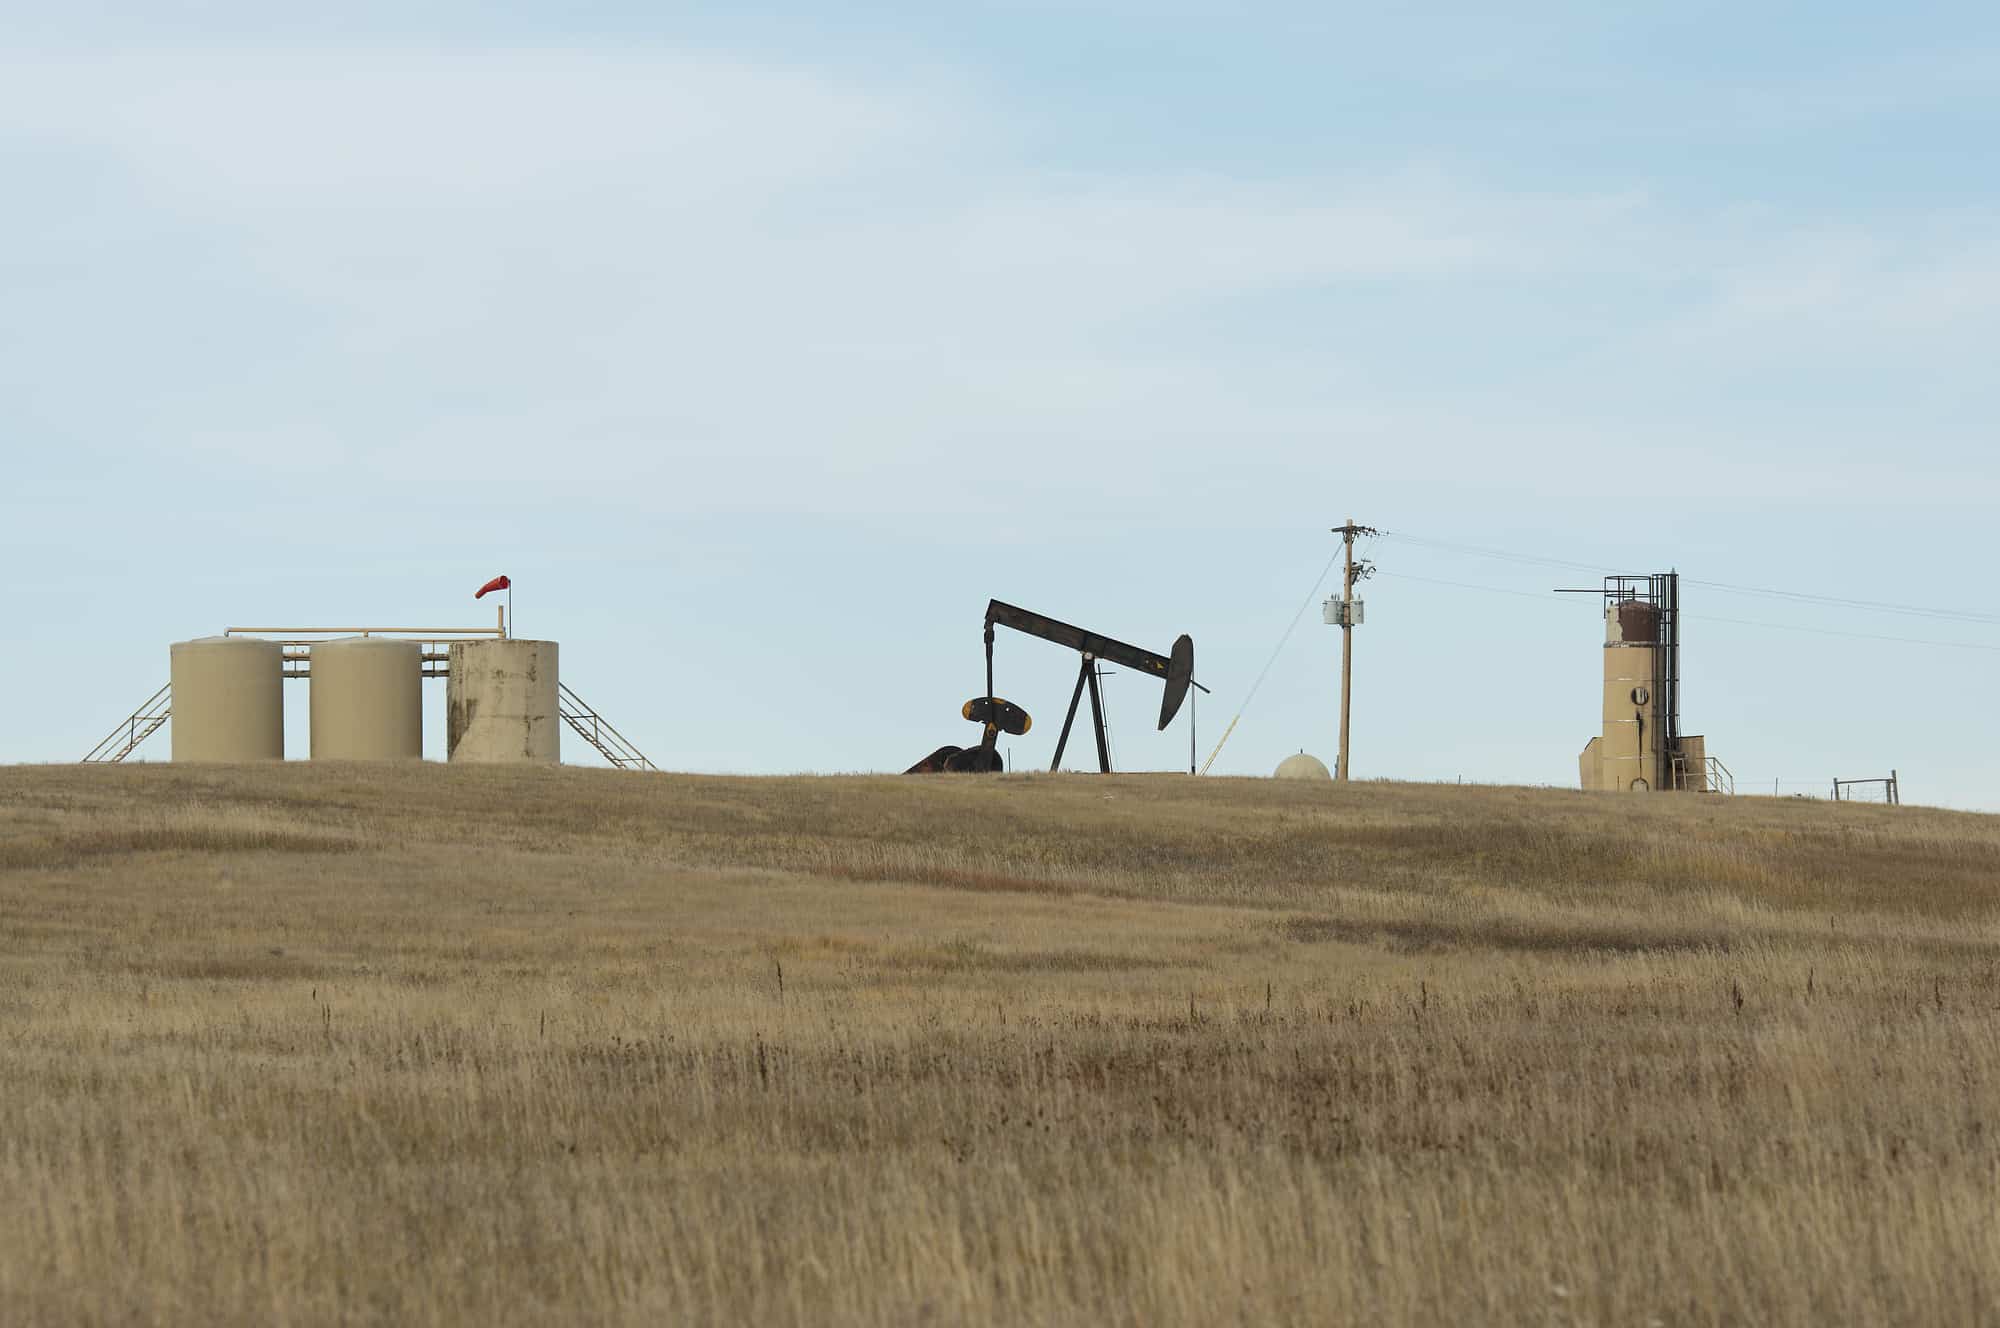 <p><em>“North Dakota. The state tree is an oil rig, and the state bird is a meth head.” </em></p> <p>This user’s humorous depiction of North Dakota underscores its complex relationship with the oil industry. The state has seen economic growth and social challenges due to its oil resources. This comment humorously encapsulates that struggle, highlighting North Dakota’s distinctive position in the nation.</p>